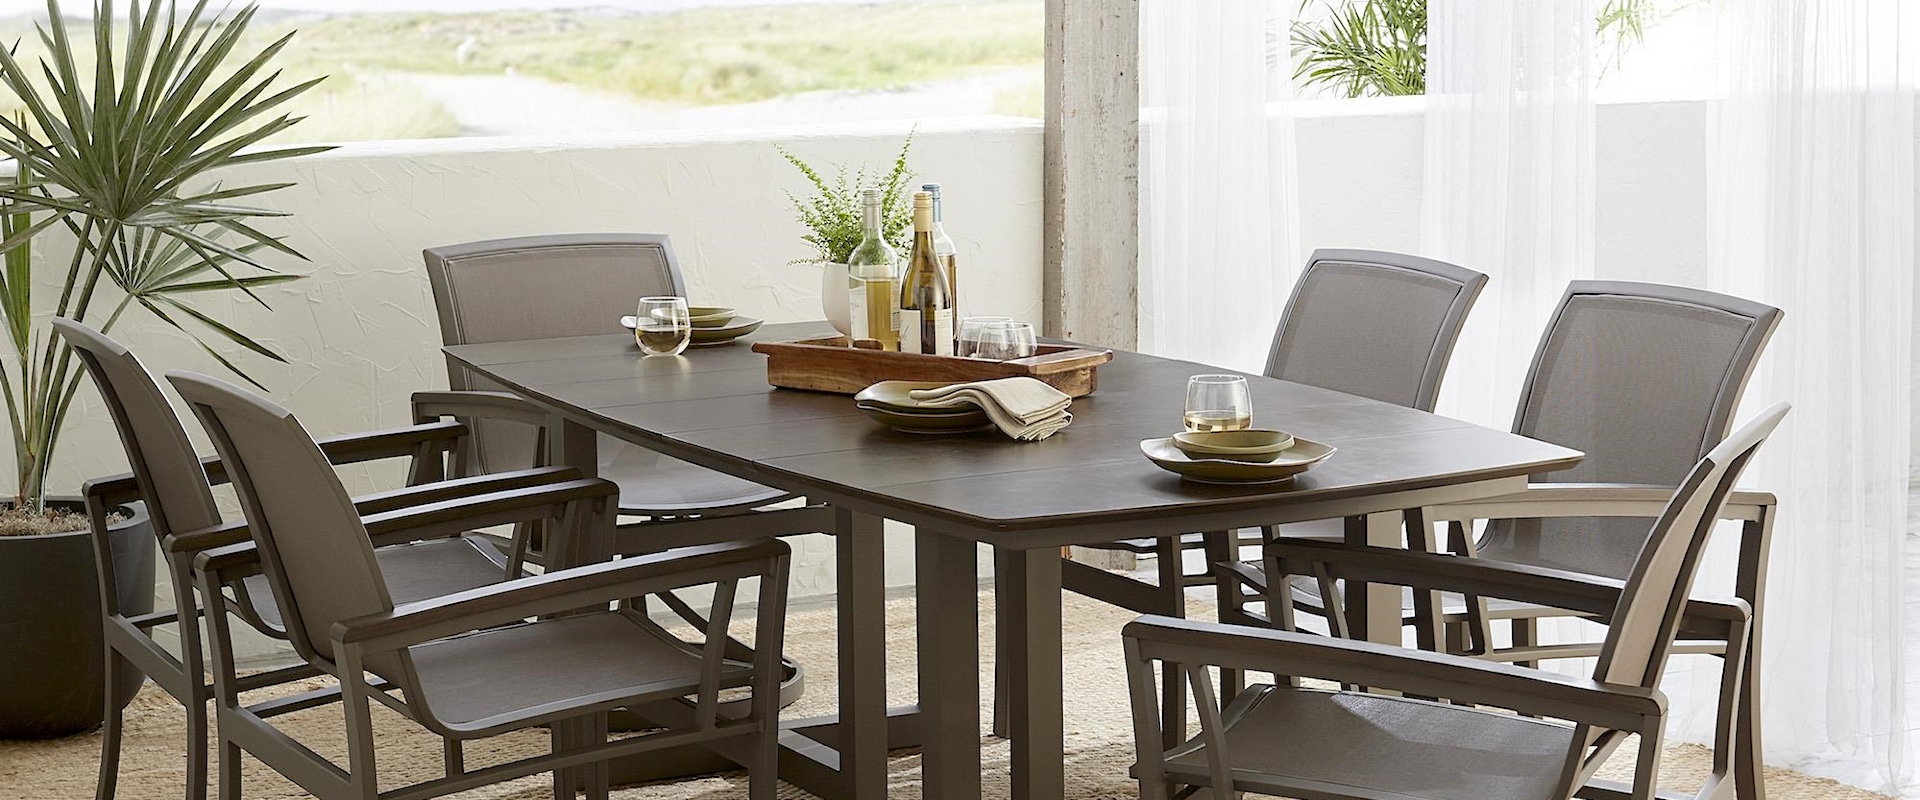 Outdoor Dining Set With Rectangular Table